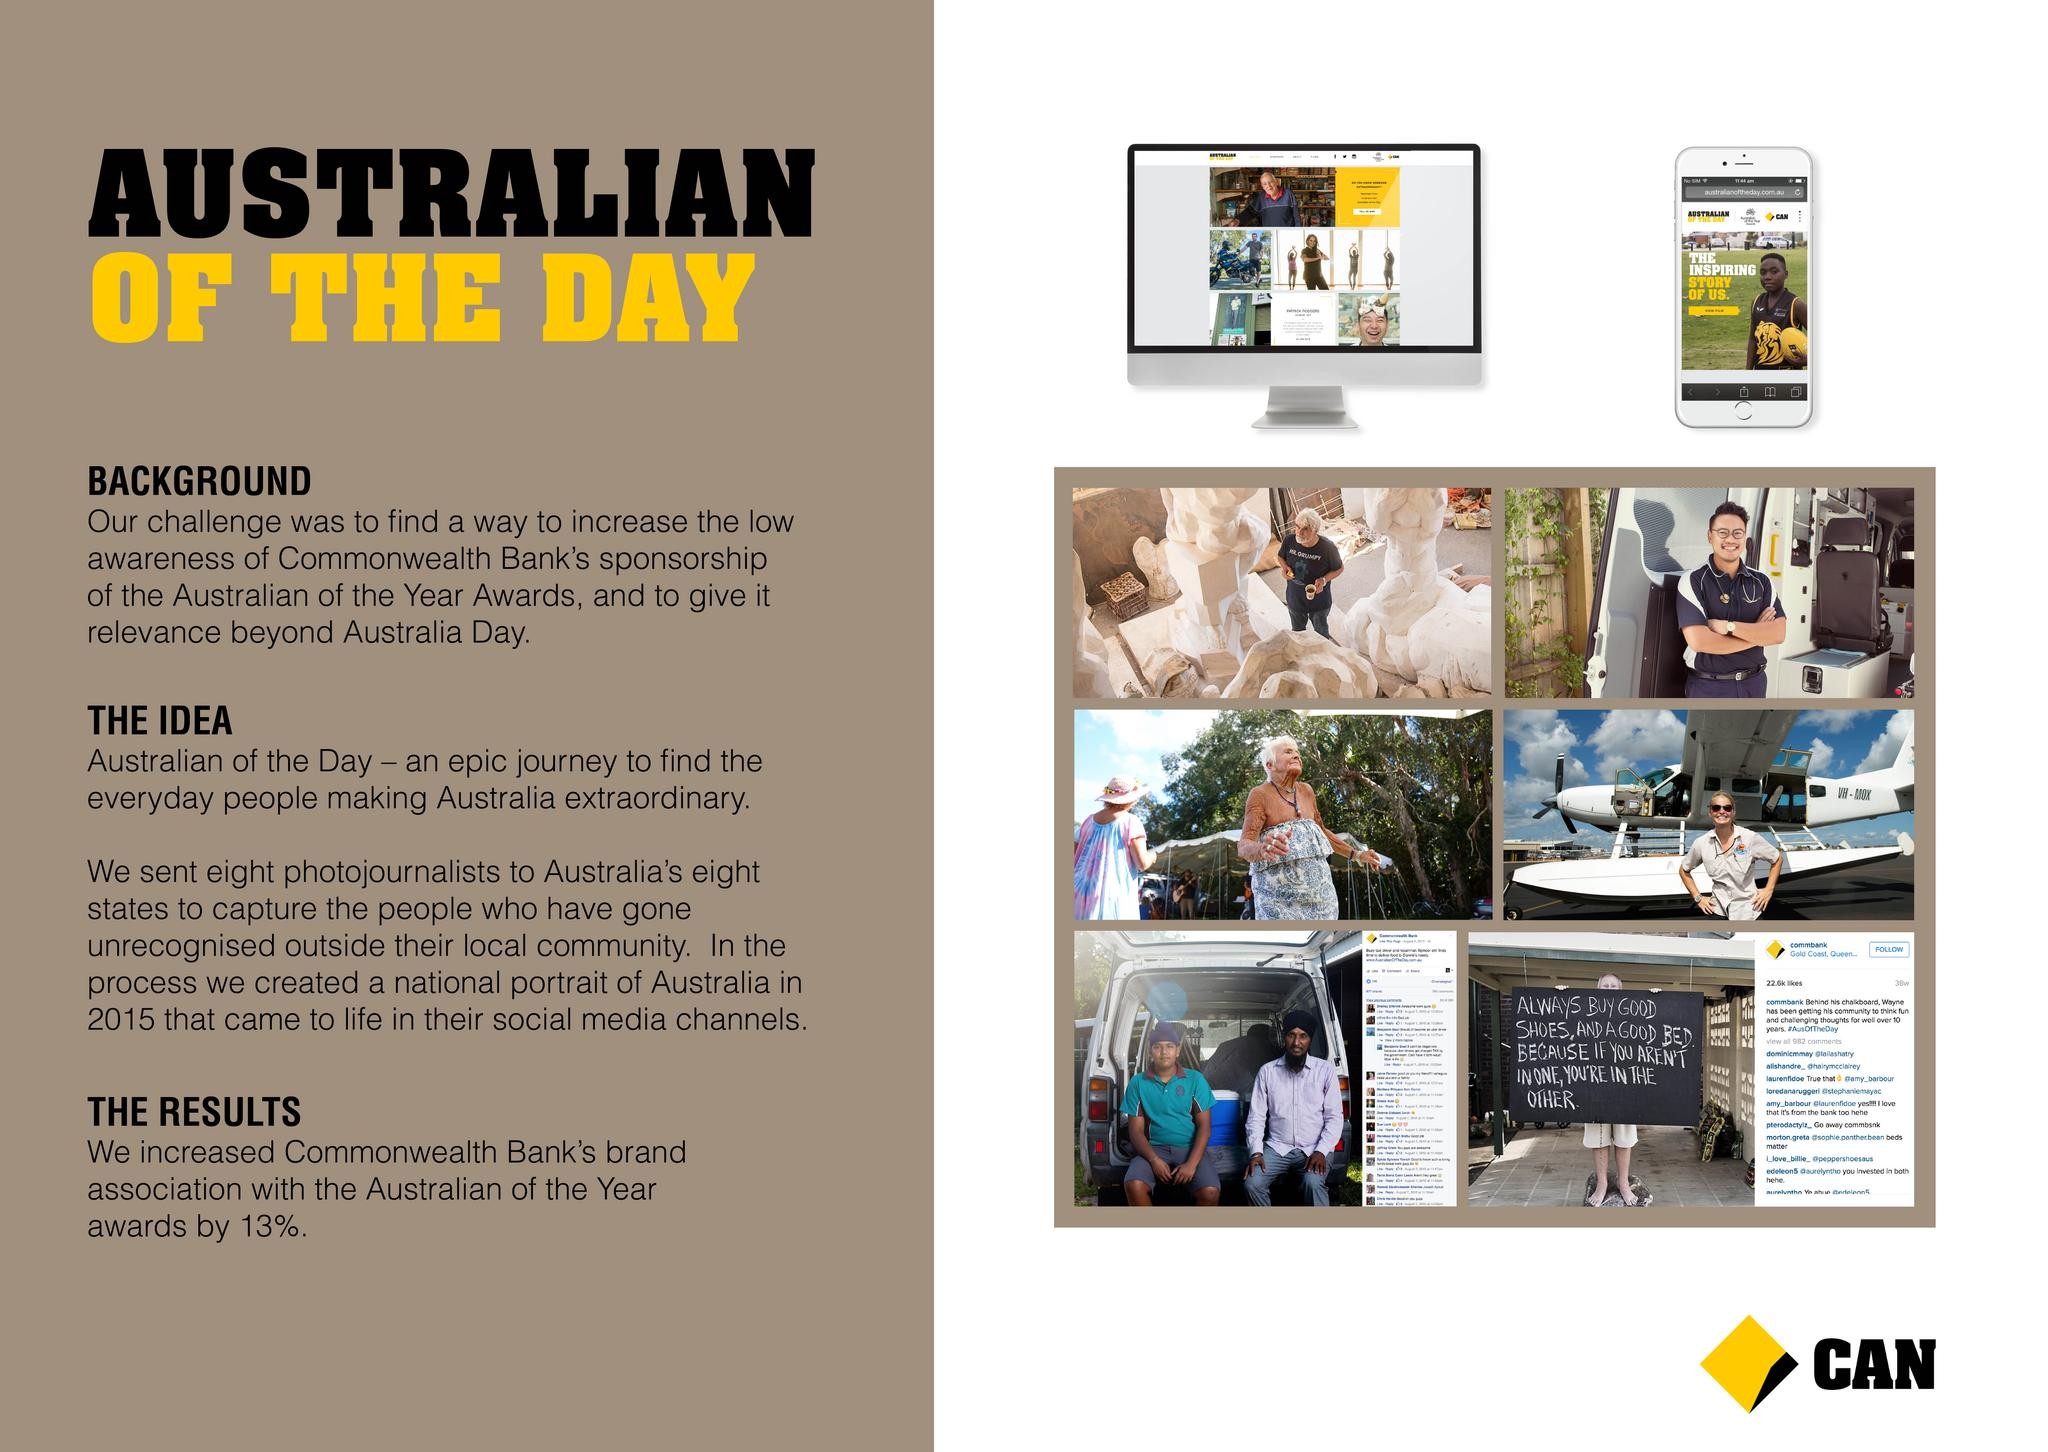 Australian Of The Day - a journey to find the everyday people making Australia e